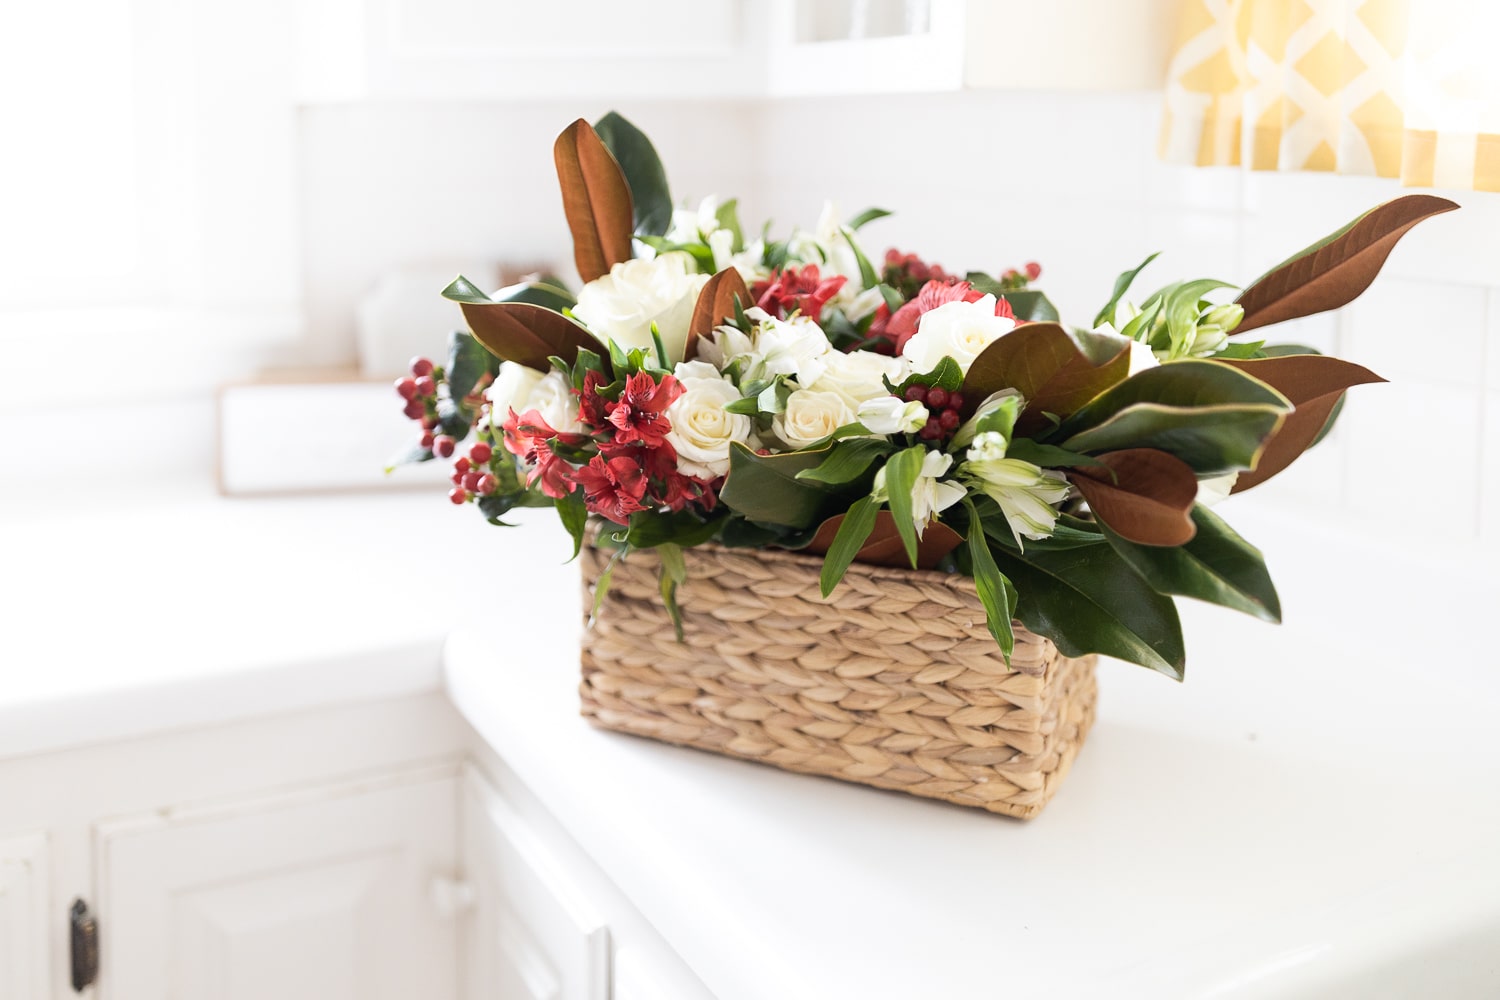 Blogger Stephanie Ziajka shares ideas for easy Thanksgiving floral arrangements on Diary of a Debutante